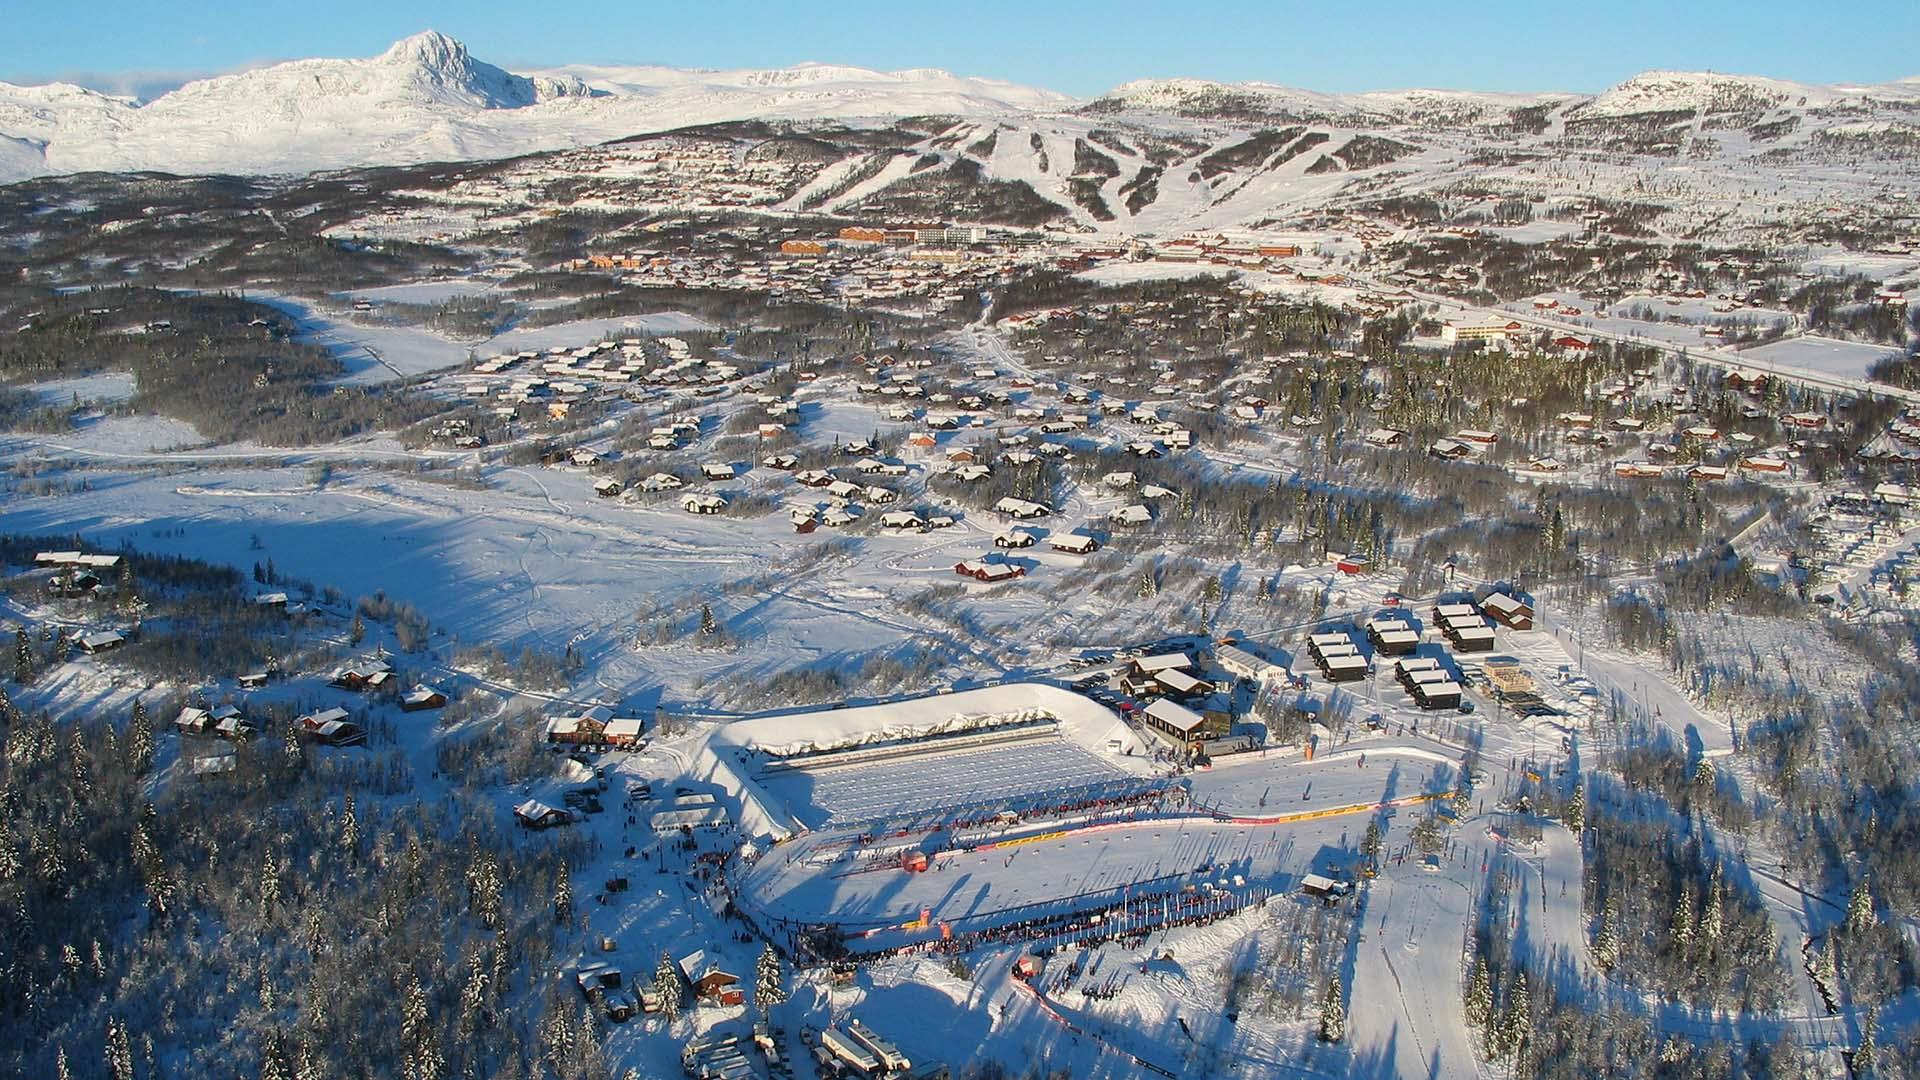 Winter drone image of the Beitostølen ski stadium (cross-country). The alpine slopes and mountains can be seen in the background.